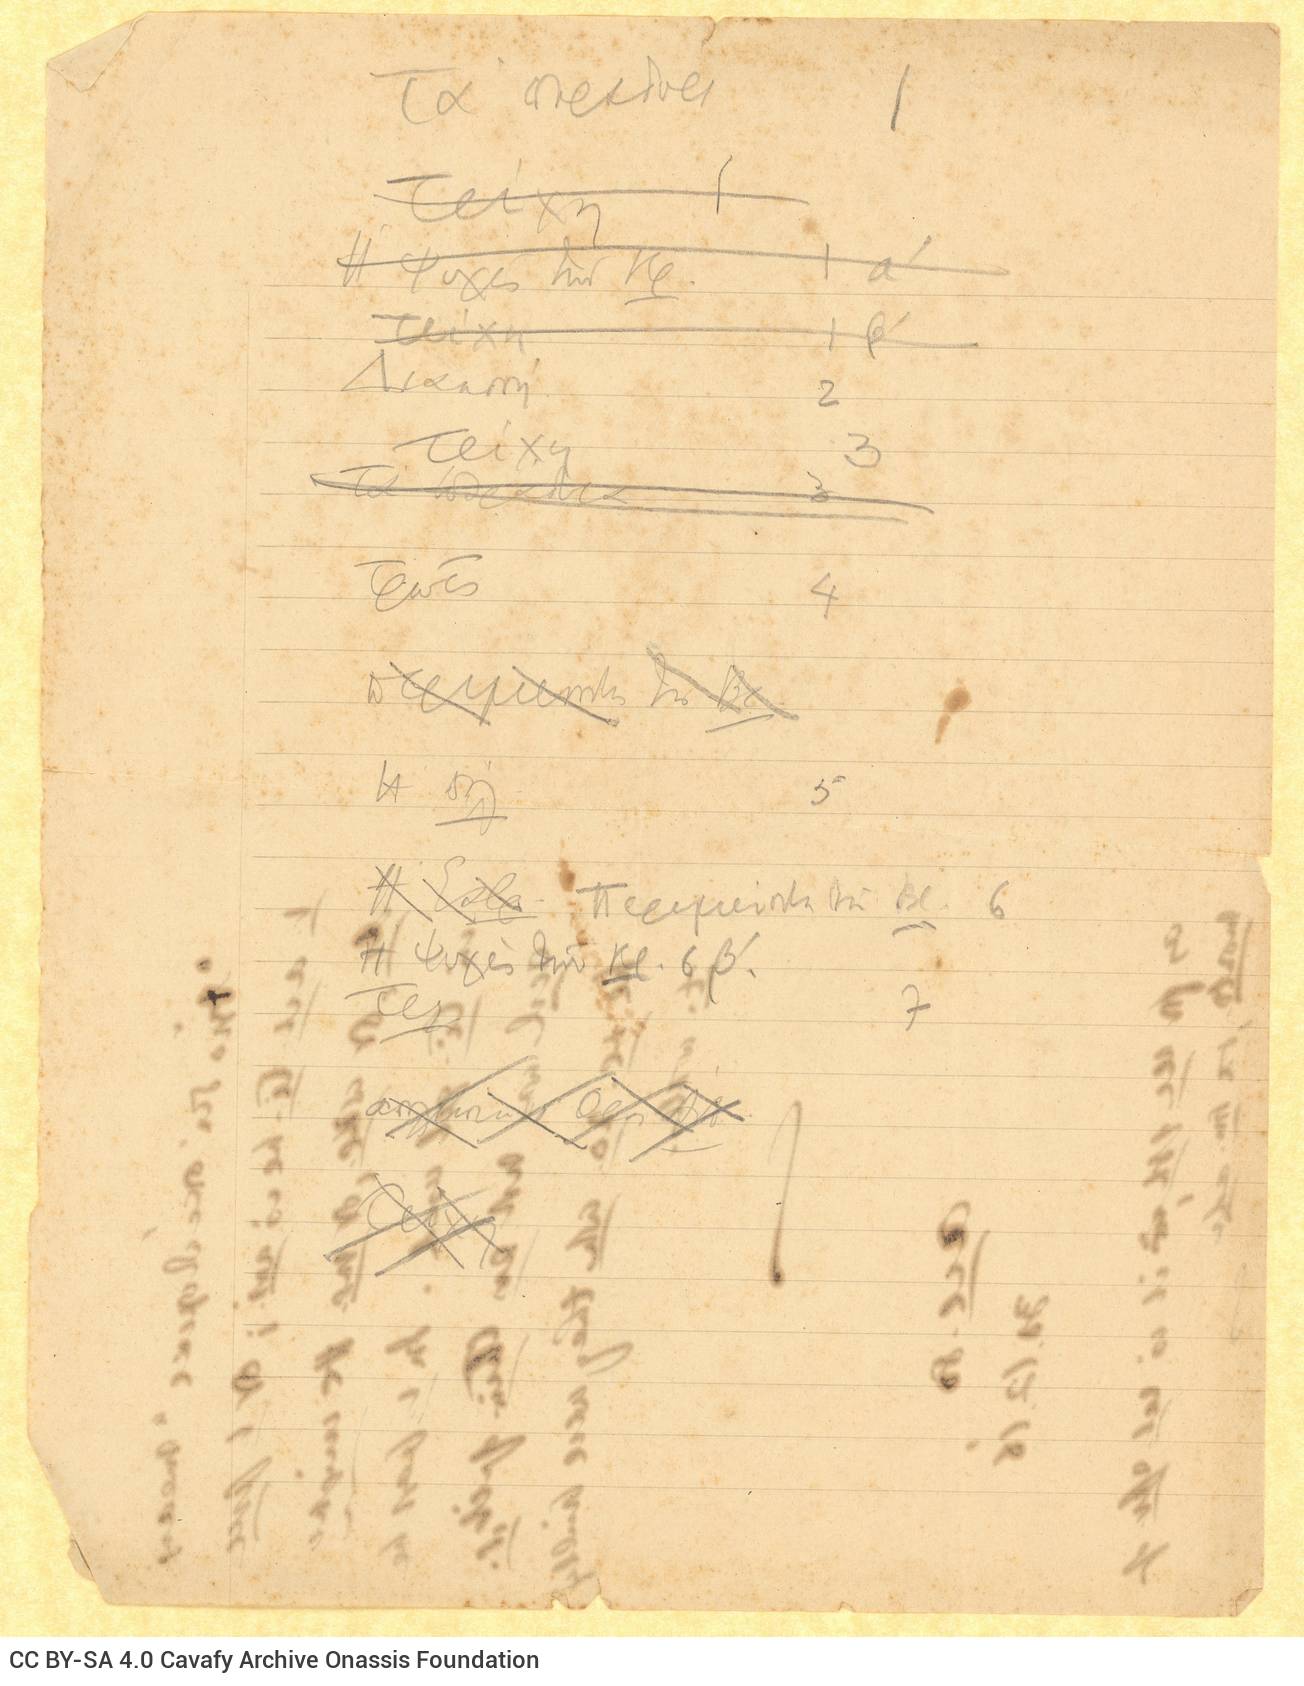 Handwritten notes by Cavafy on one side of a ruled sheet, initially folded in a bifolio. crossed out titles of poems of hi